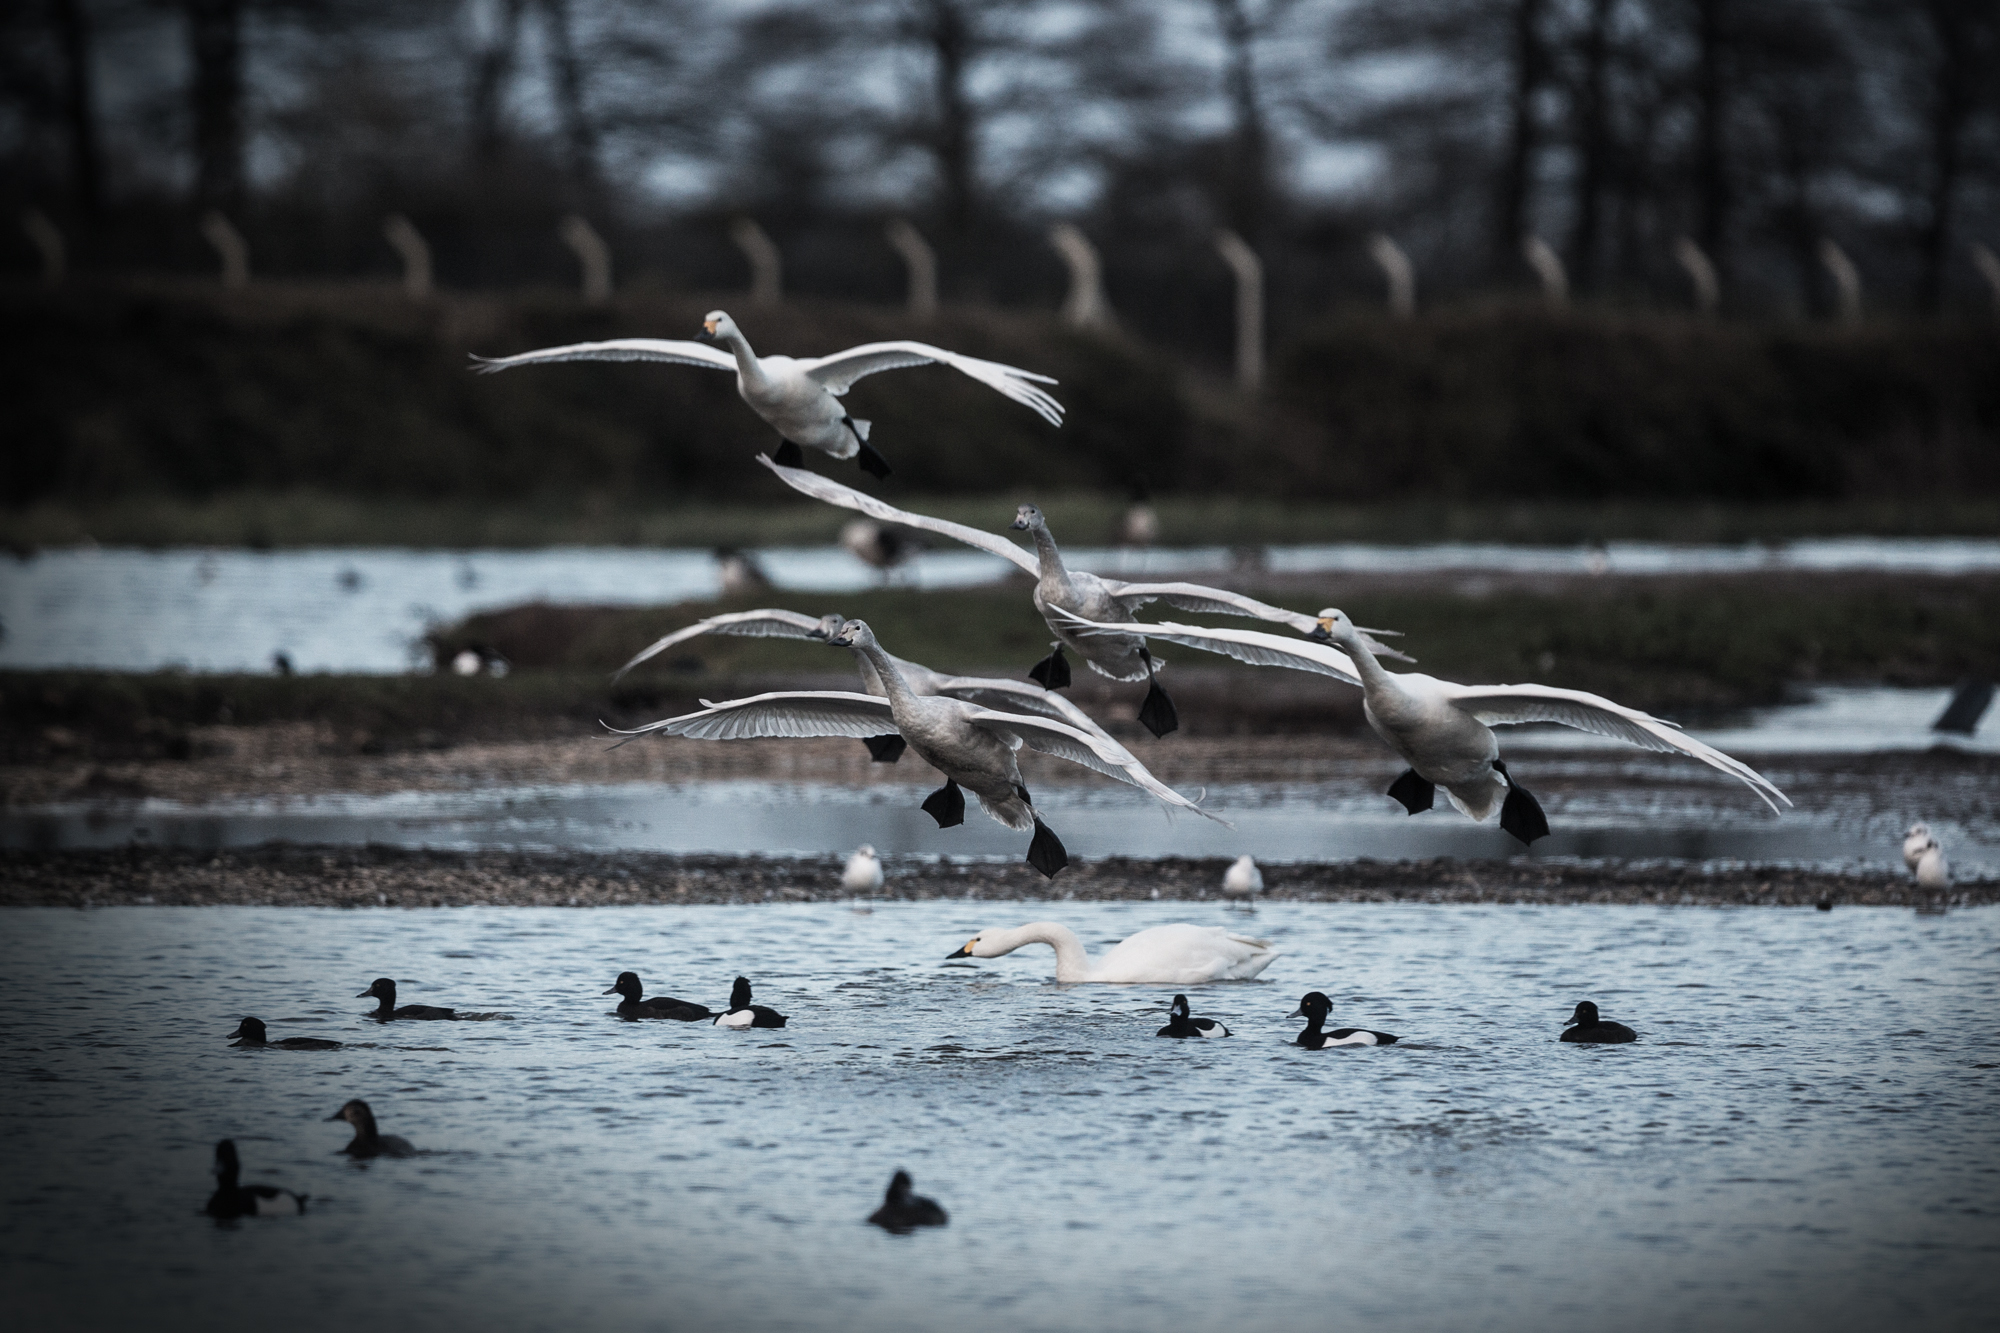 Swans flying over water on the Tack Piece at Slimbridge